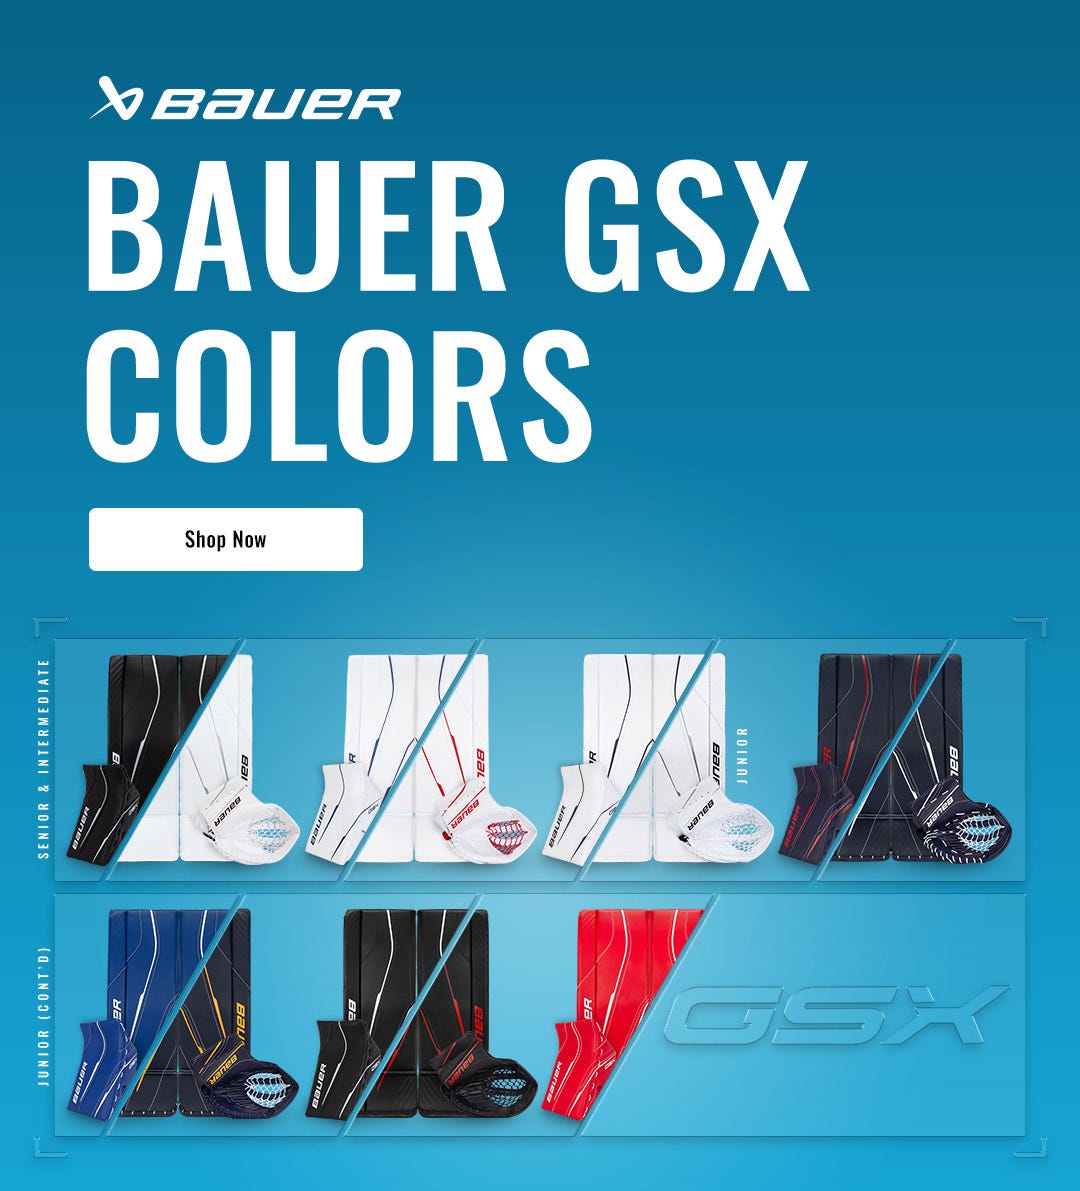 Bauer GSX Goalie Equipment: Now in more colors